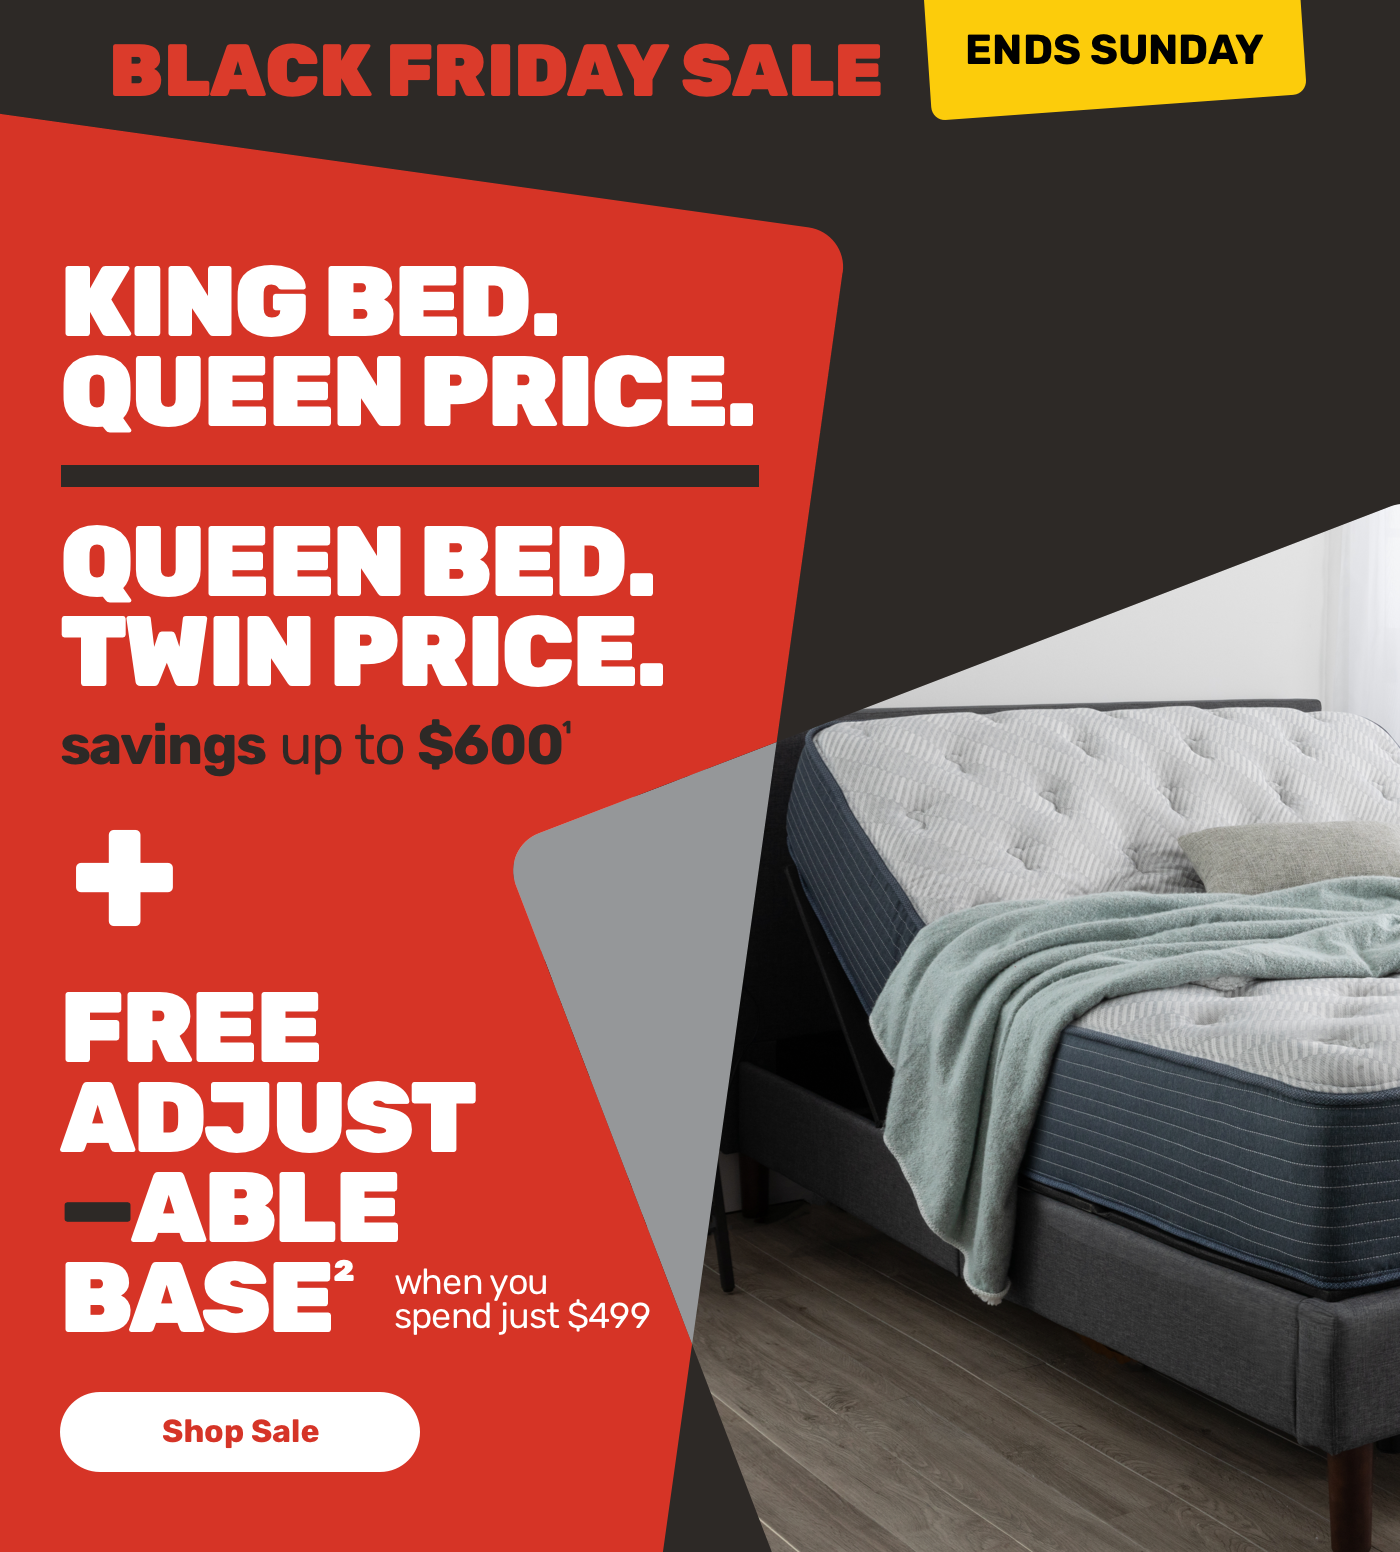 Black Friday Sale. Ends Sunday. King Bed. Queen Price. Queen Bed. Twin Price. Plus Free Adjustable Base. Shop Sale.